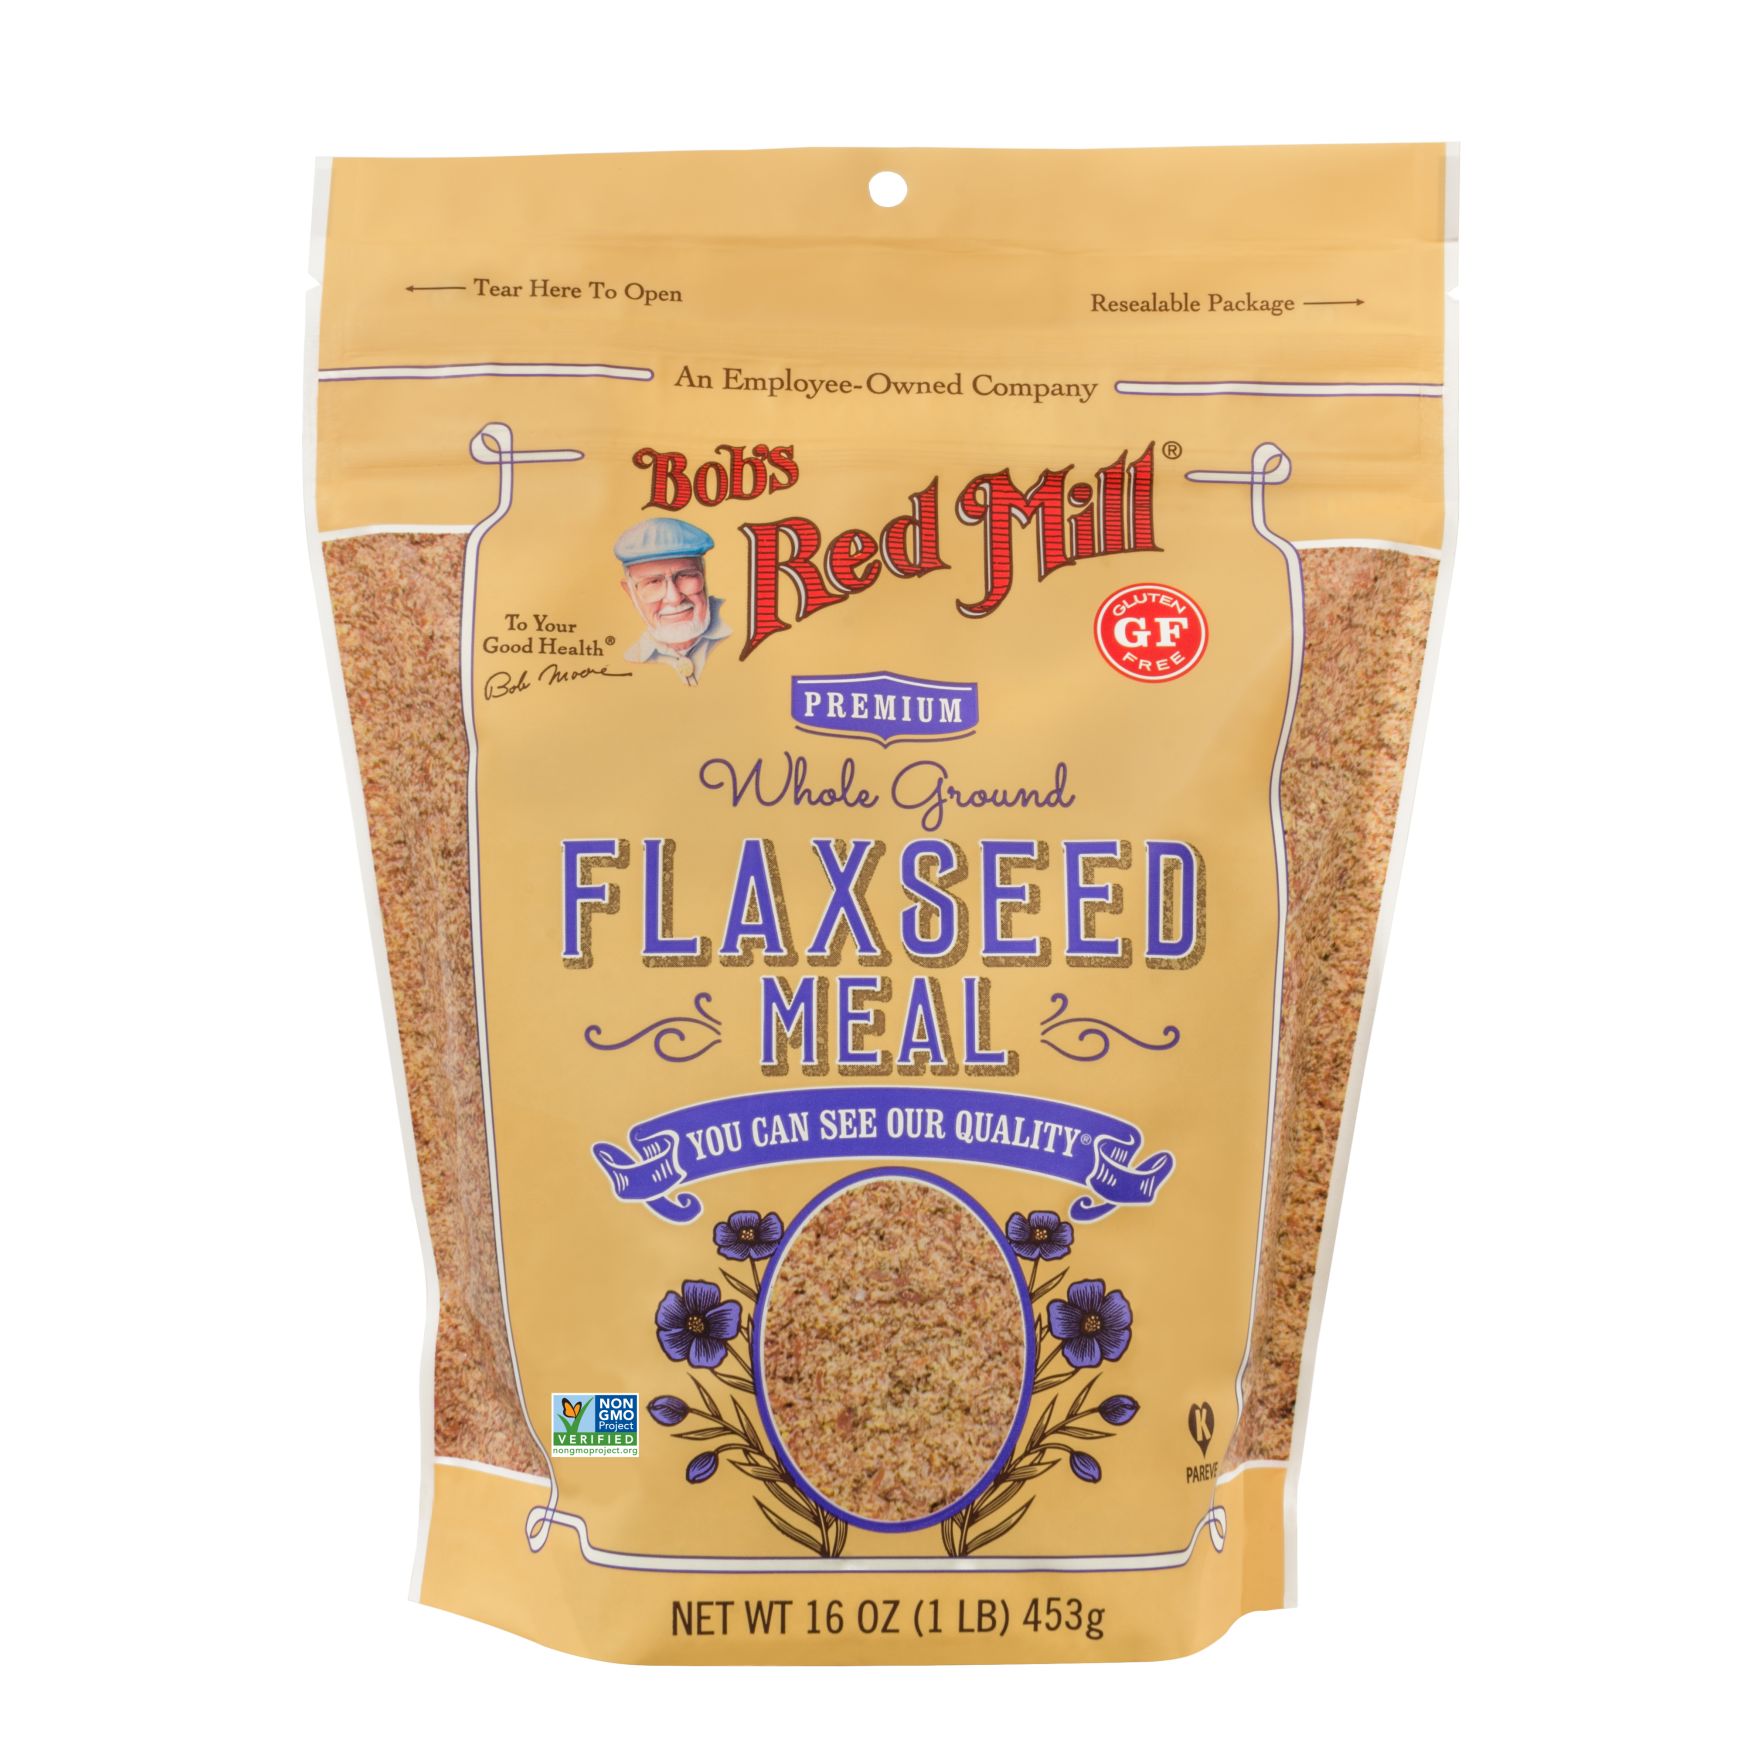 How To Grind Flaxseed (2 Methods) 